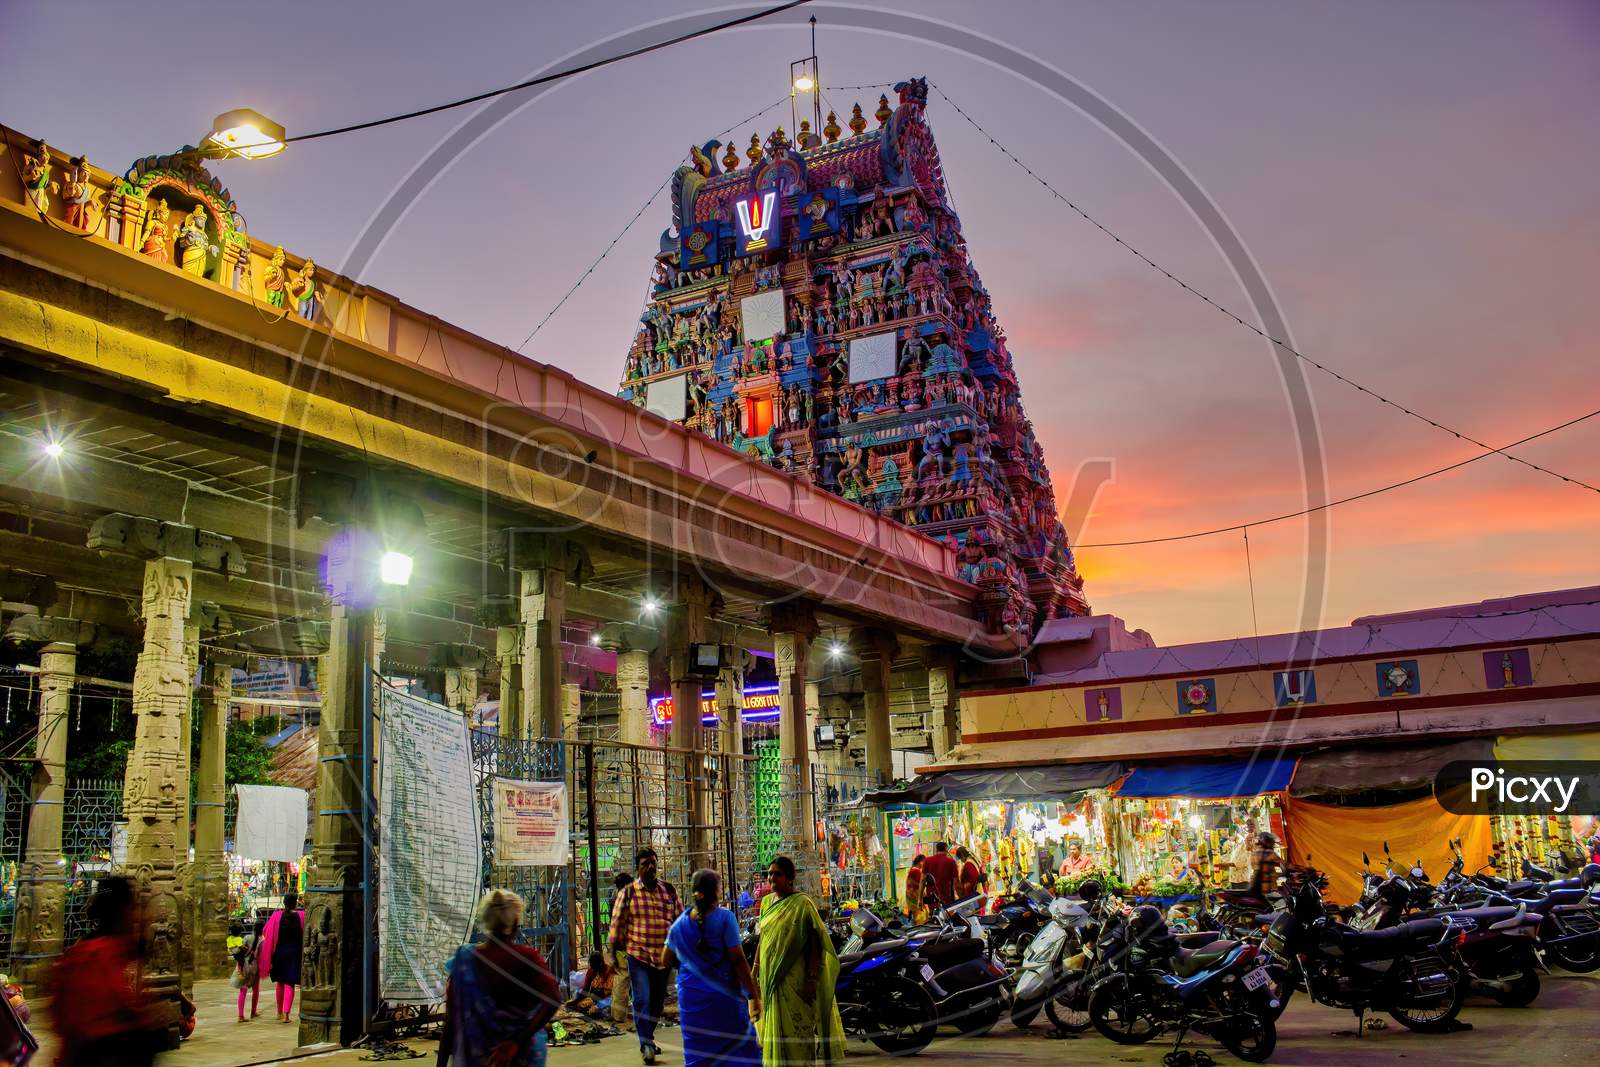 Chennai, South India - October 27, 2018: A Hindu Temple Dedicated To Lord Venkat Krishna, The Parthasarathy Temple Located At Triplicane During Night With Devotee Worship In The Building